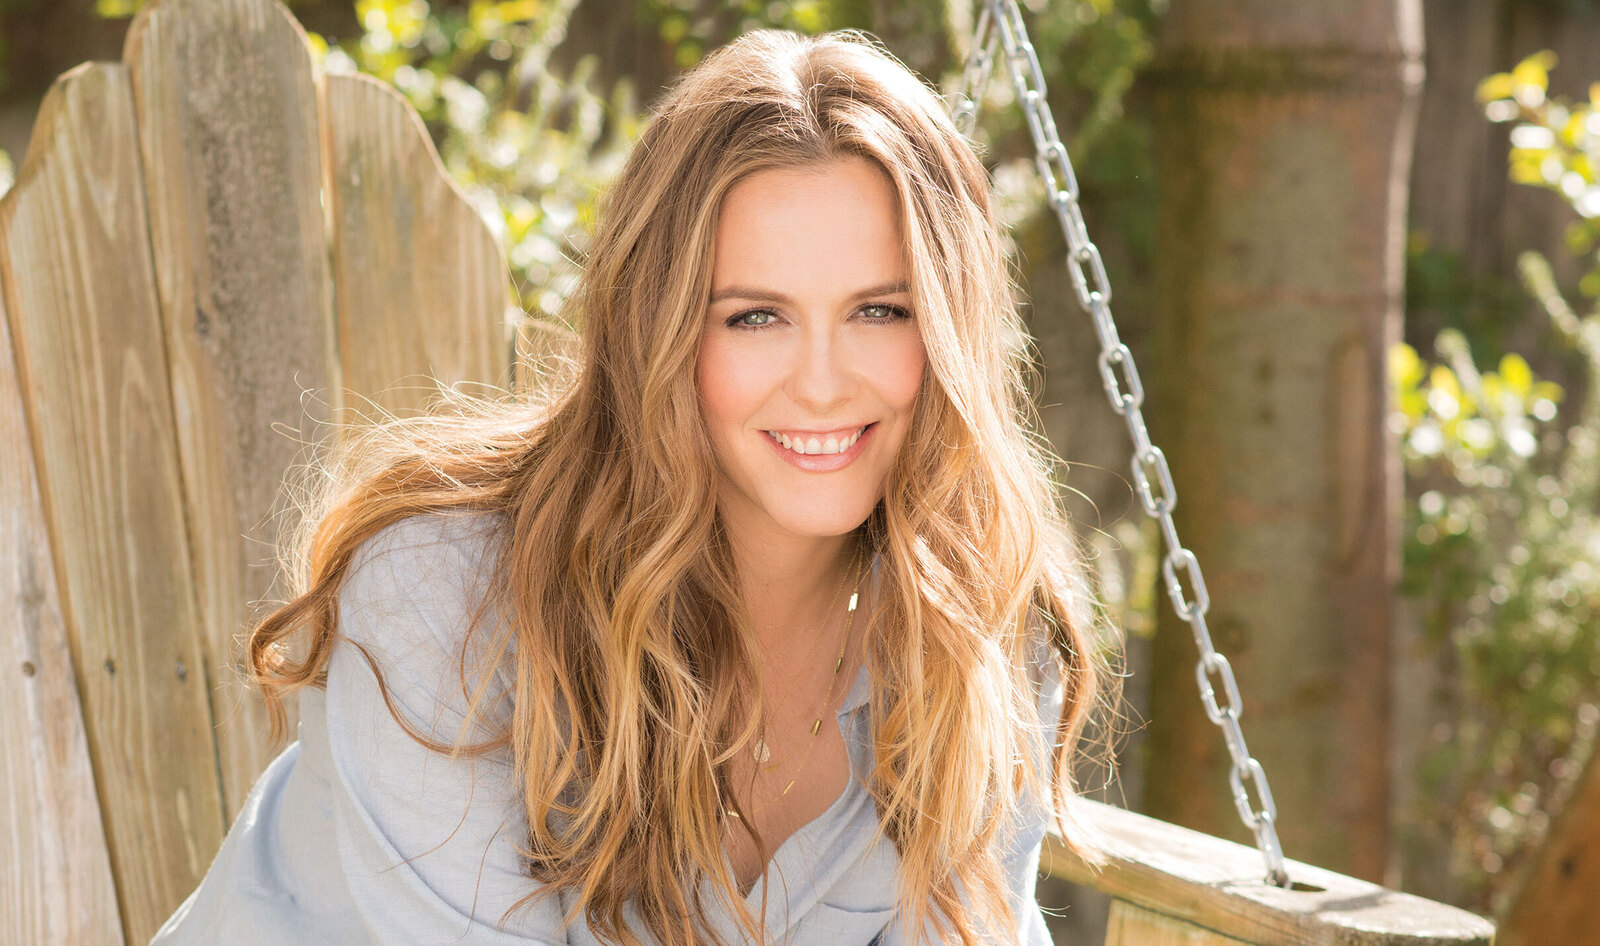 Alicia Silverstone's Sustainable Home Garden Is a Vegan Food Paradise